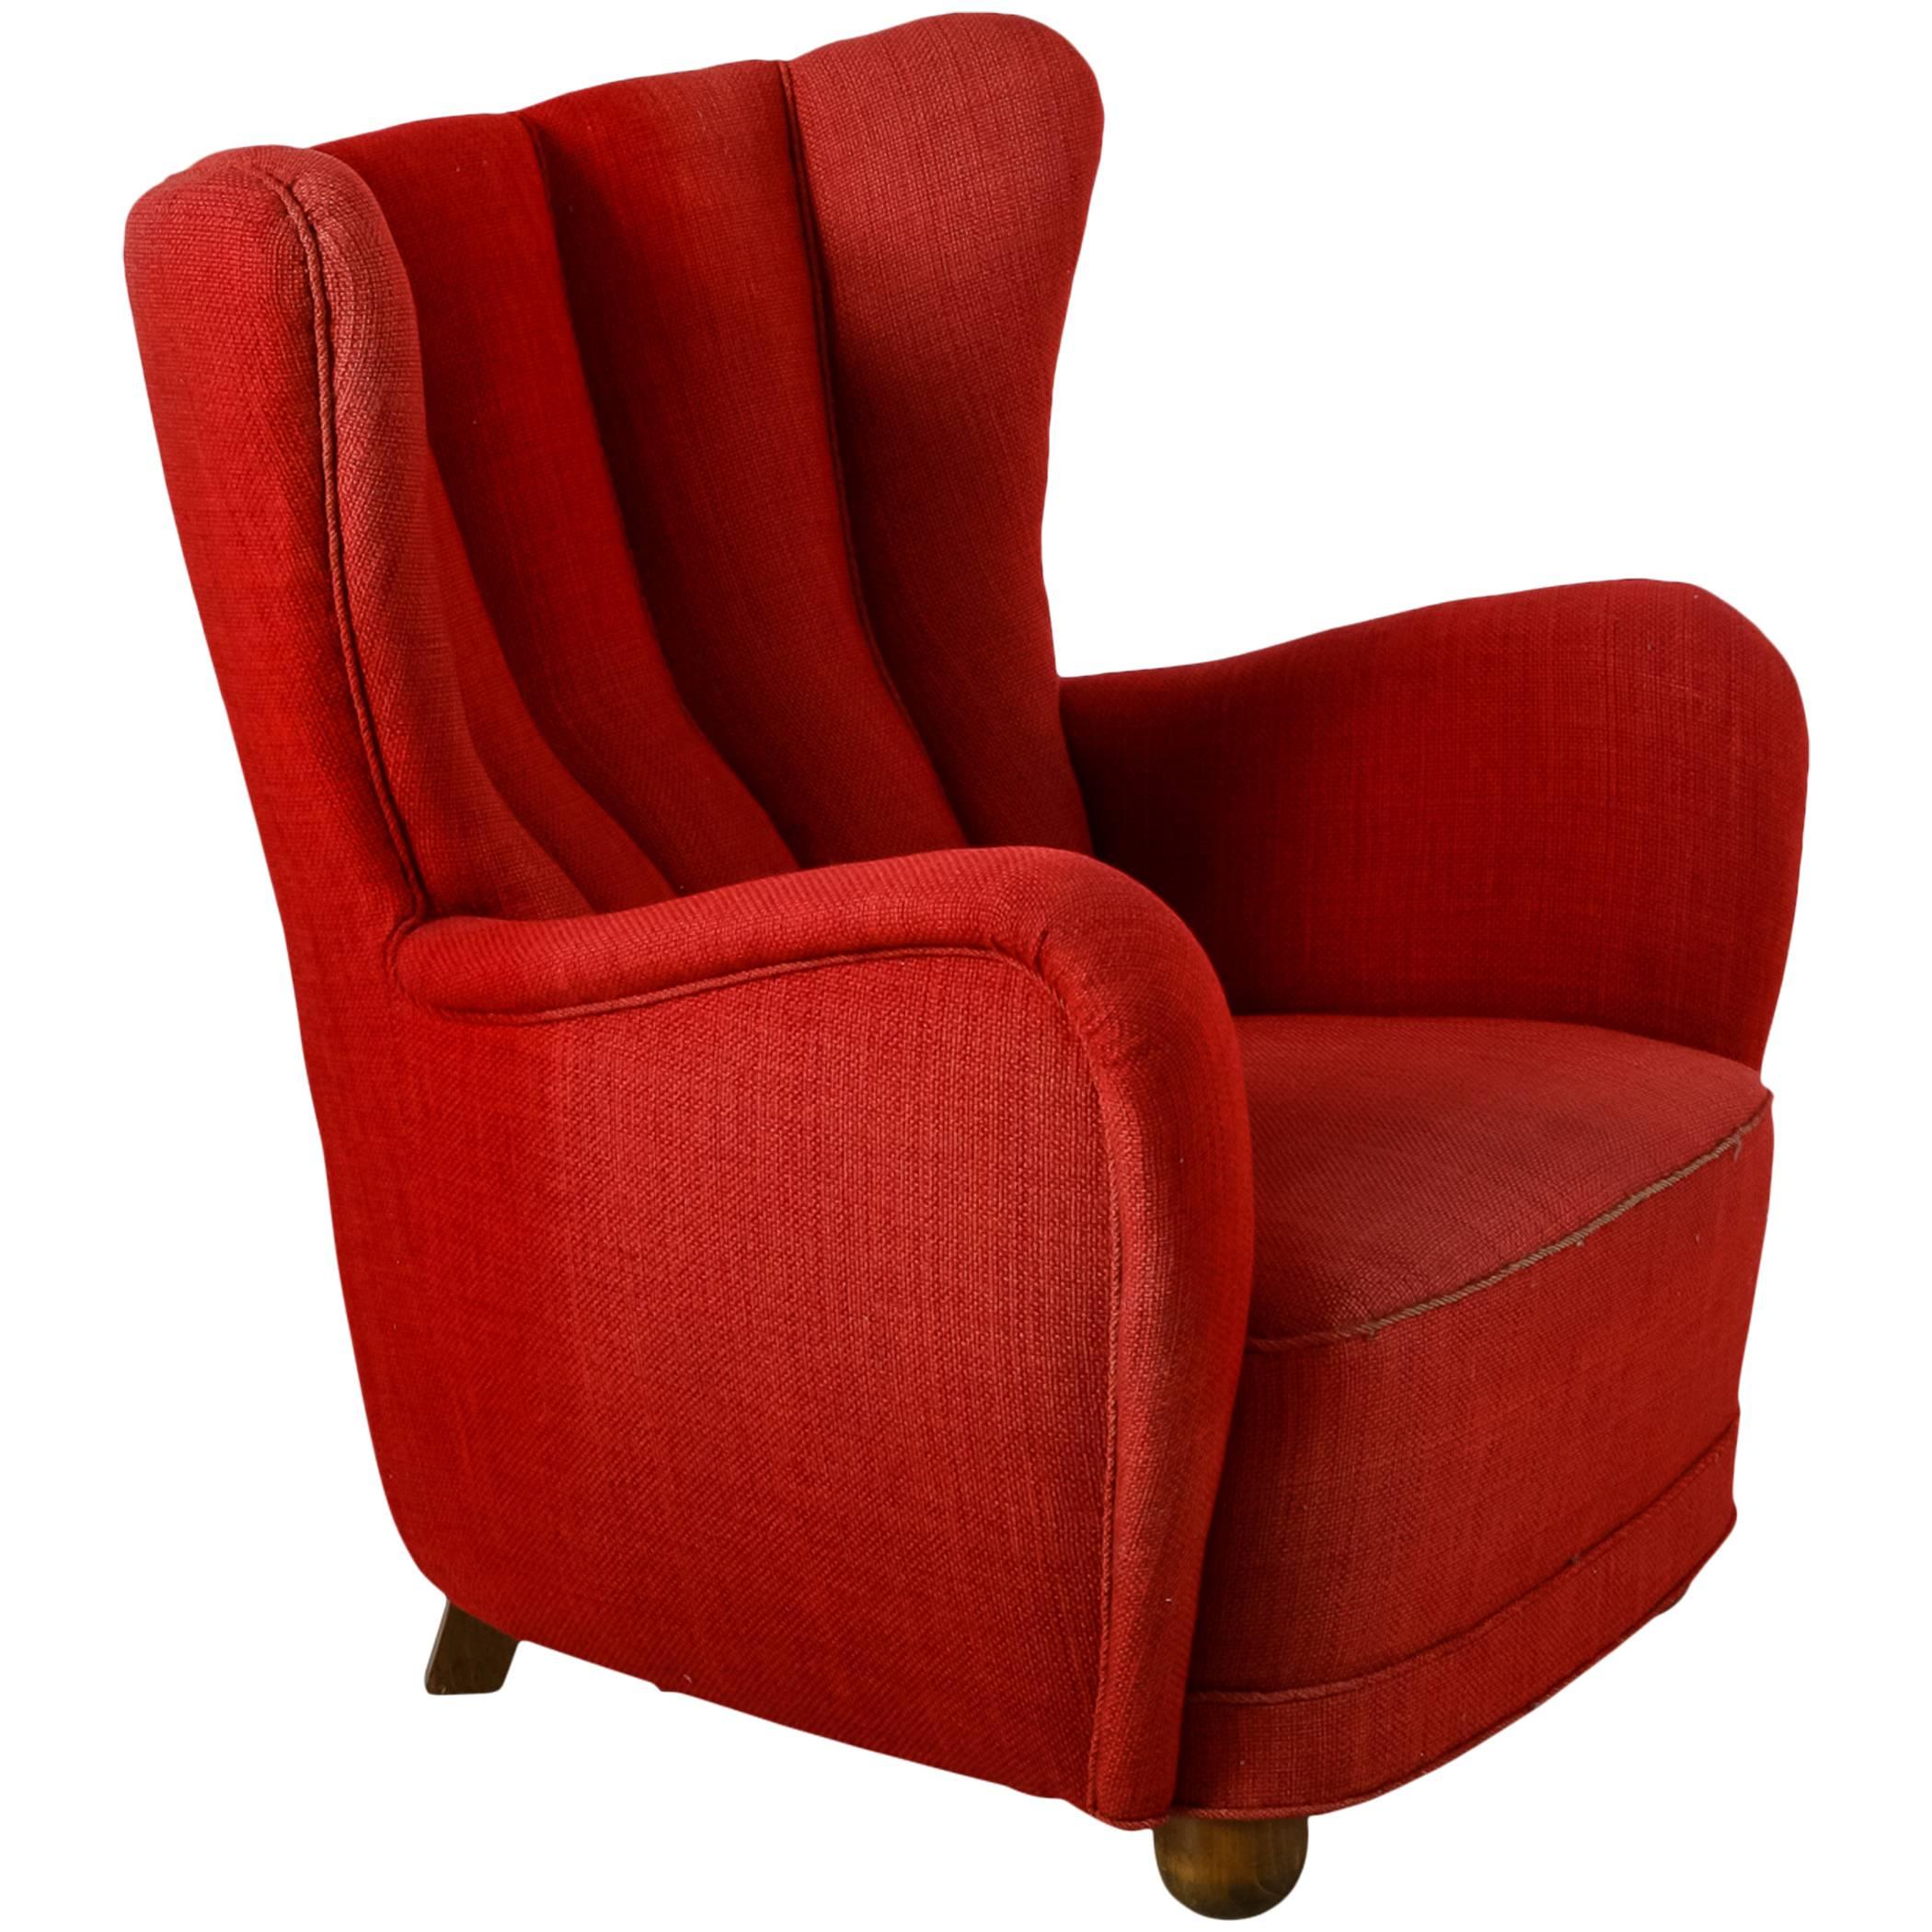 Danish Highback Easy Chair with Red Wool Upholstery, 1940s For Sale